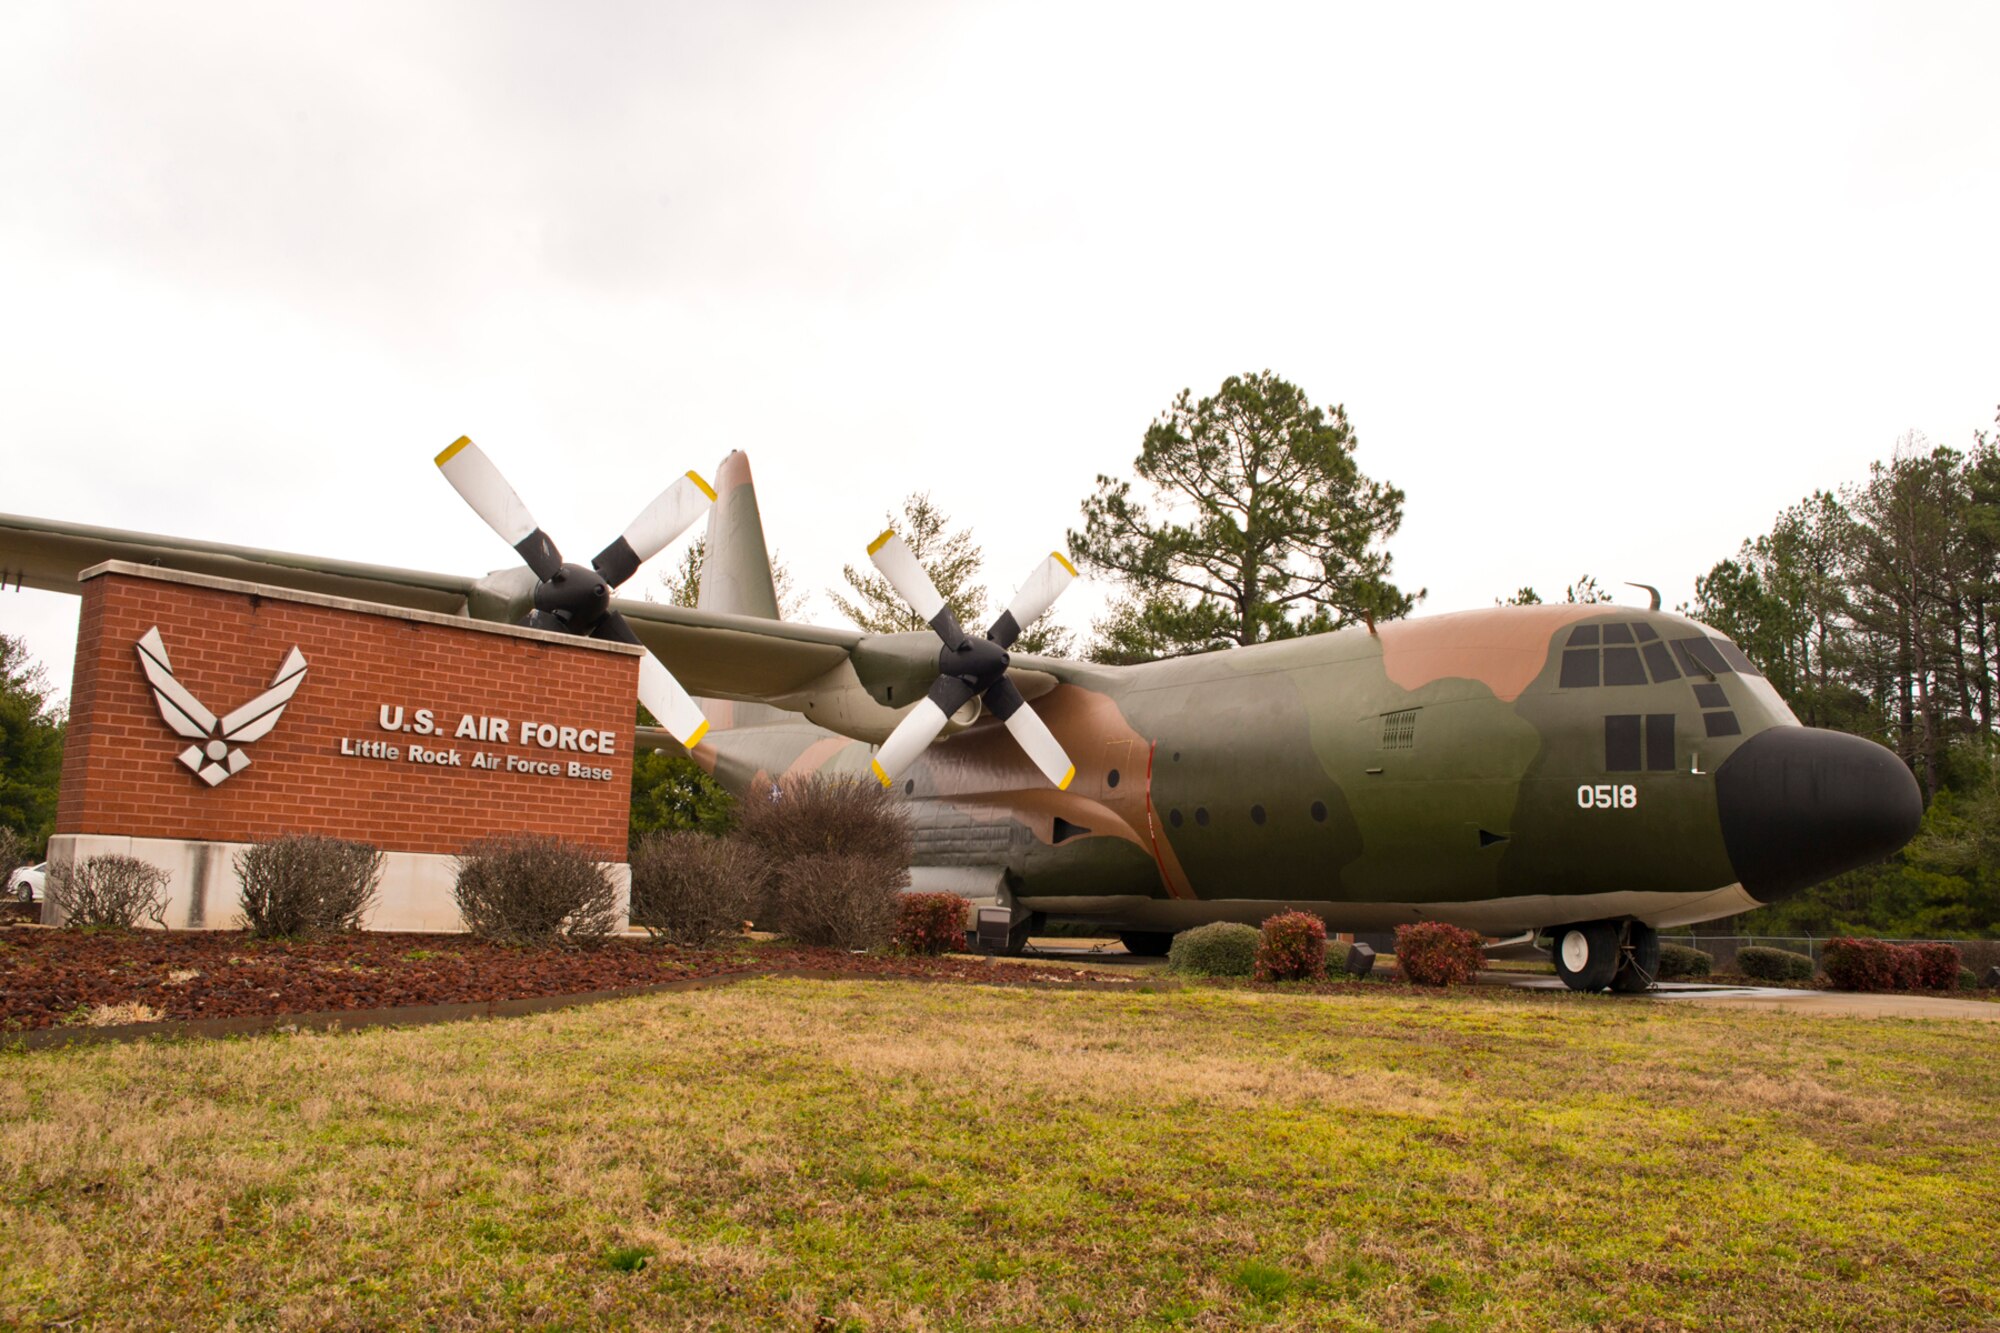 The last “Herk” out of Vietnam before the fall of Saigon in 1975, sits on display in front of the main gate at Little Rock Air Force Base, Ark., Feb. 24, 2016. It served with several Air Force units until it was given to the South Vietnamese Air Force Nov. 2, 1972, under the Military Assistance Program. On April 29, 1975, one day before the fall of Saigon, Maj. Phuong, a South Vietnamese instructor pilot, flew an overloaded aircraft with 452 people on board, from Tan Son Nhut Air Base, Vietnam, to the Utapao Royal Thai Air Force Base in Thailand. (U.S. Air Force photo by Master Sgt. Jeff Walston/Released)